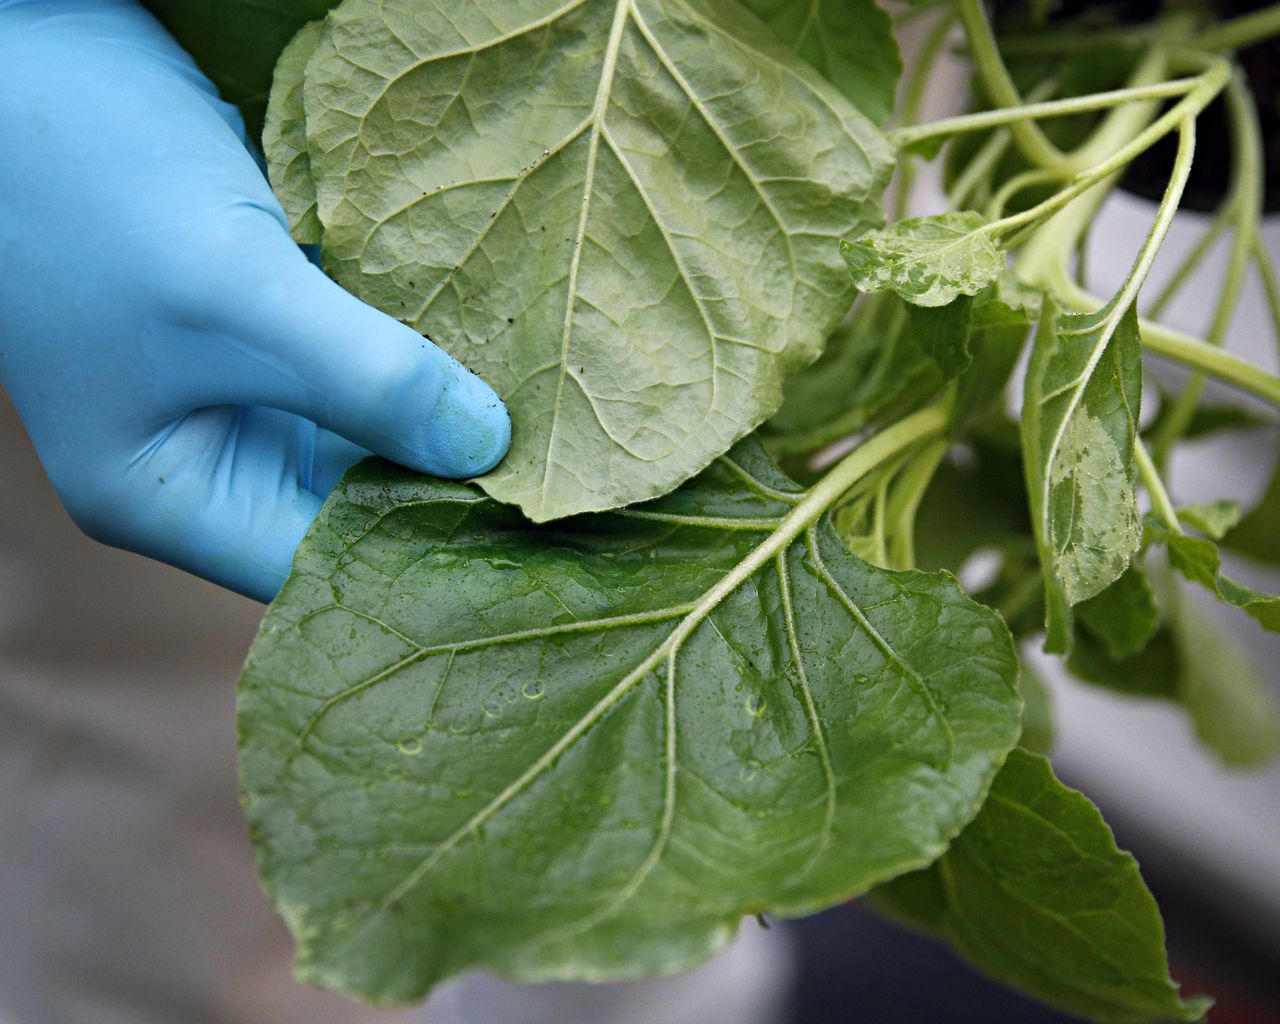 FILE PHOTO: An worker shows the difference between the leaf of the Nicotiana benthamiana plant before (top) and after (botom) the infiltration process at Medicago greenhouse in Quebec City, August 13, 2014. REUTERS/Mathieu Belanger